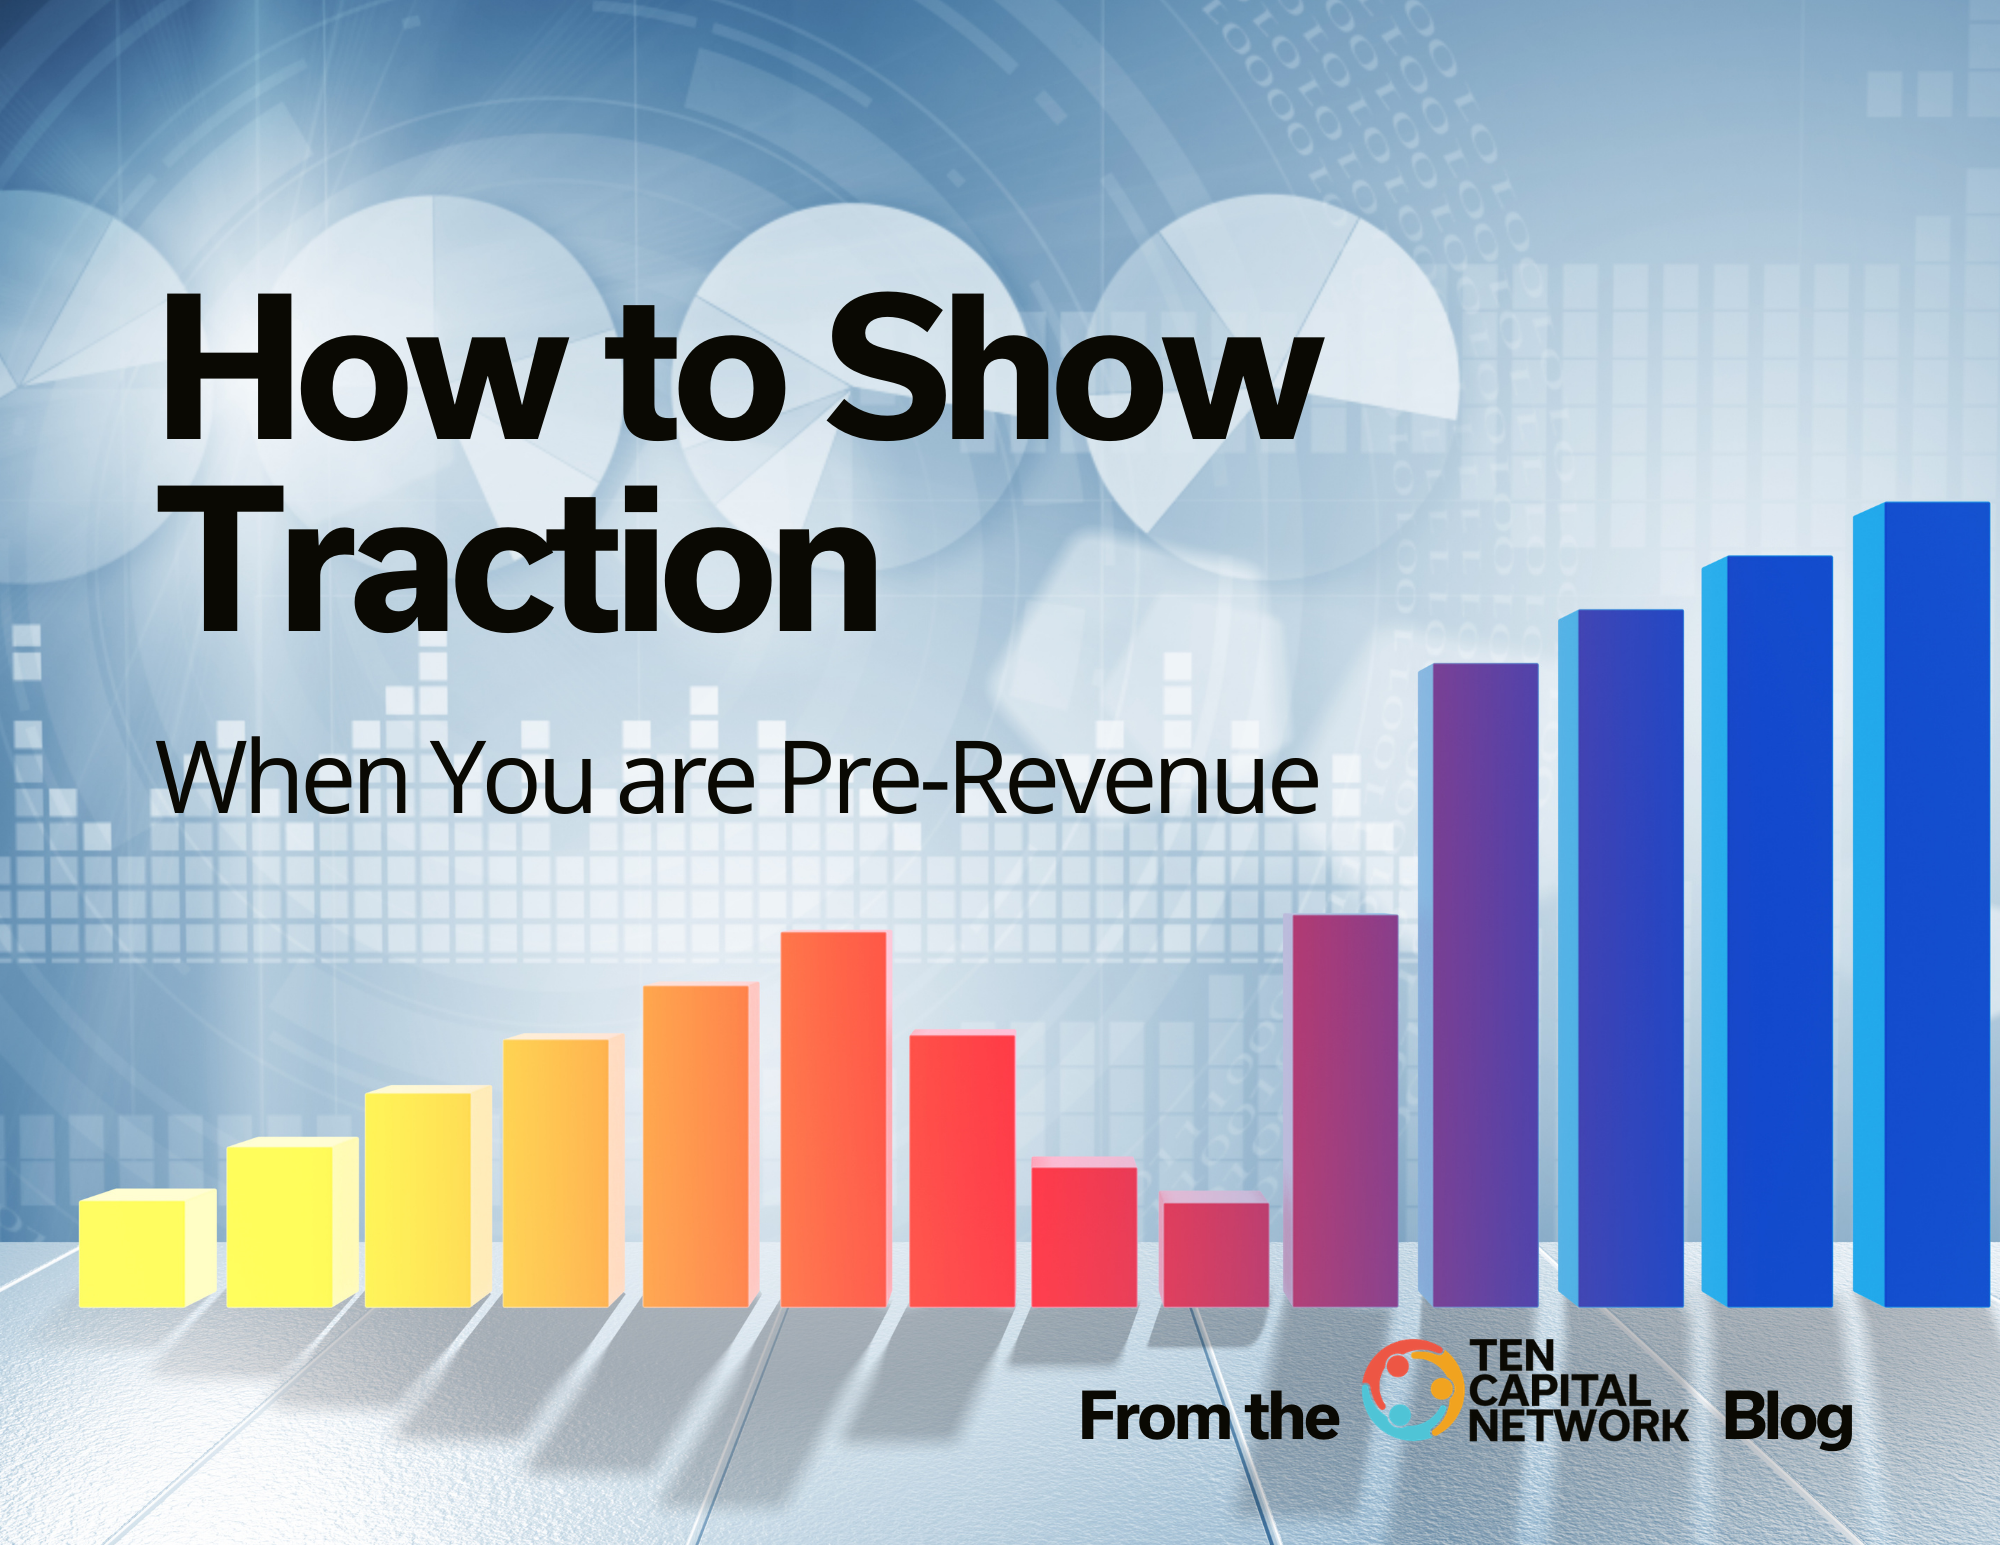 how to show traction when you are pre-revenue